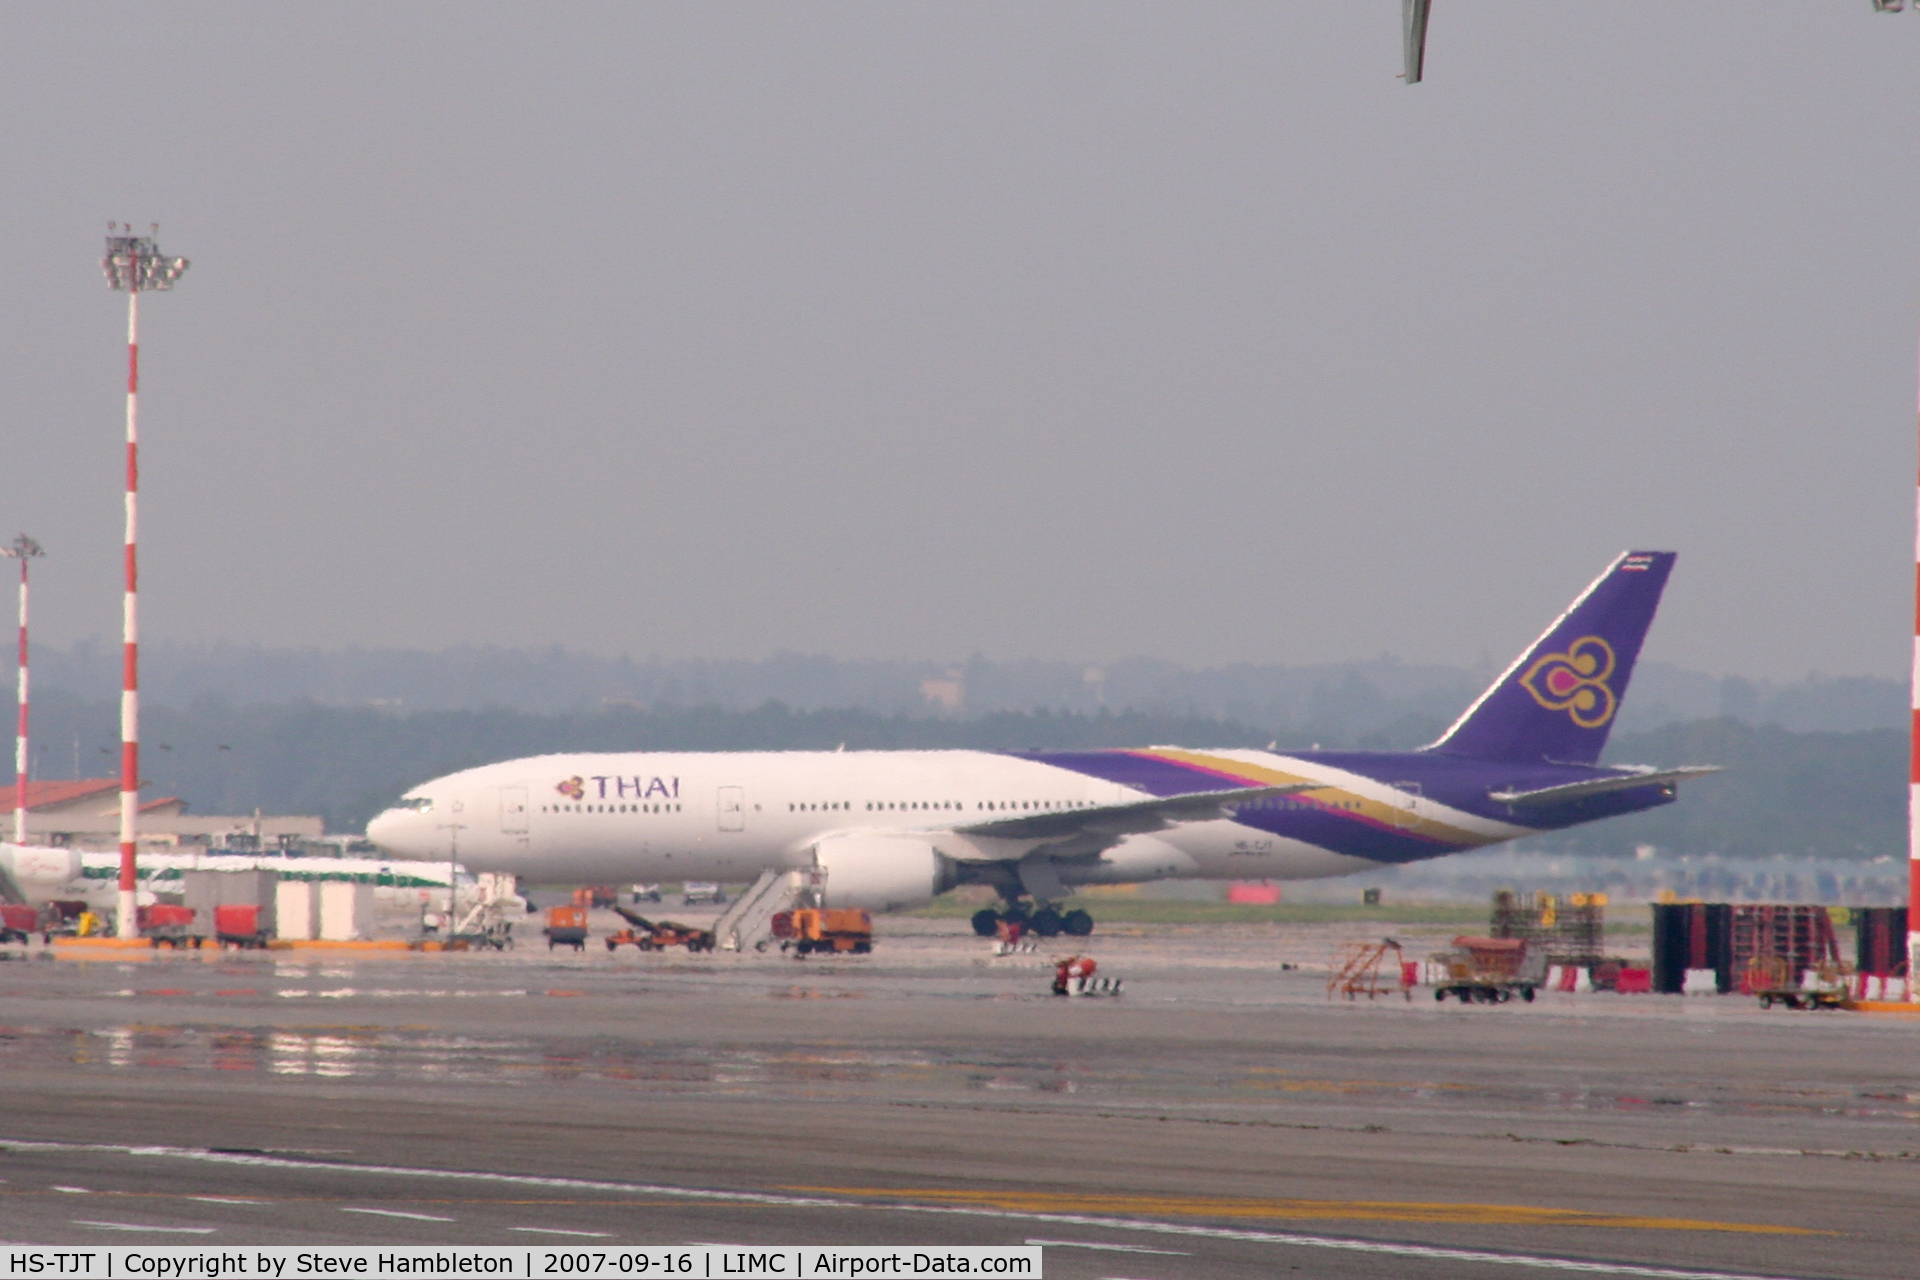 HS-TJT, 2006 Boeing 777-2D7/ER C/N 34588, Too far away and too hazy, but I couldn't resist a shot of this beauty!